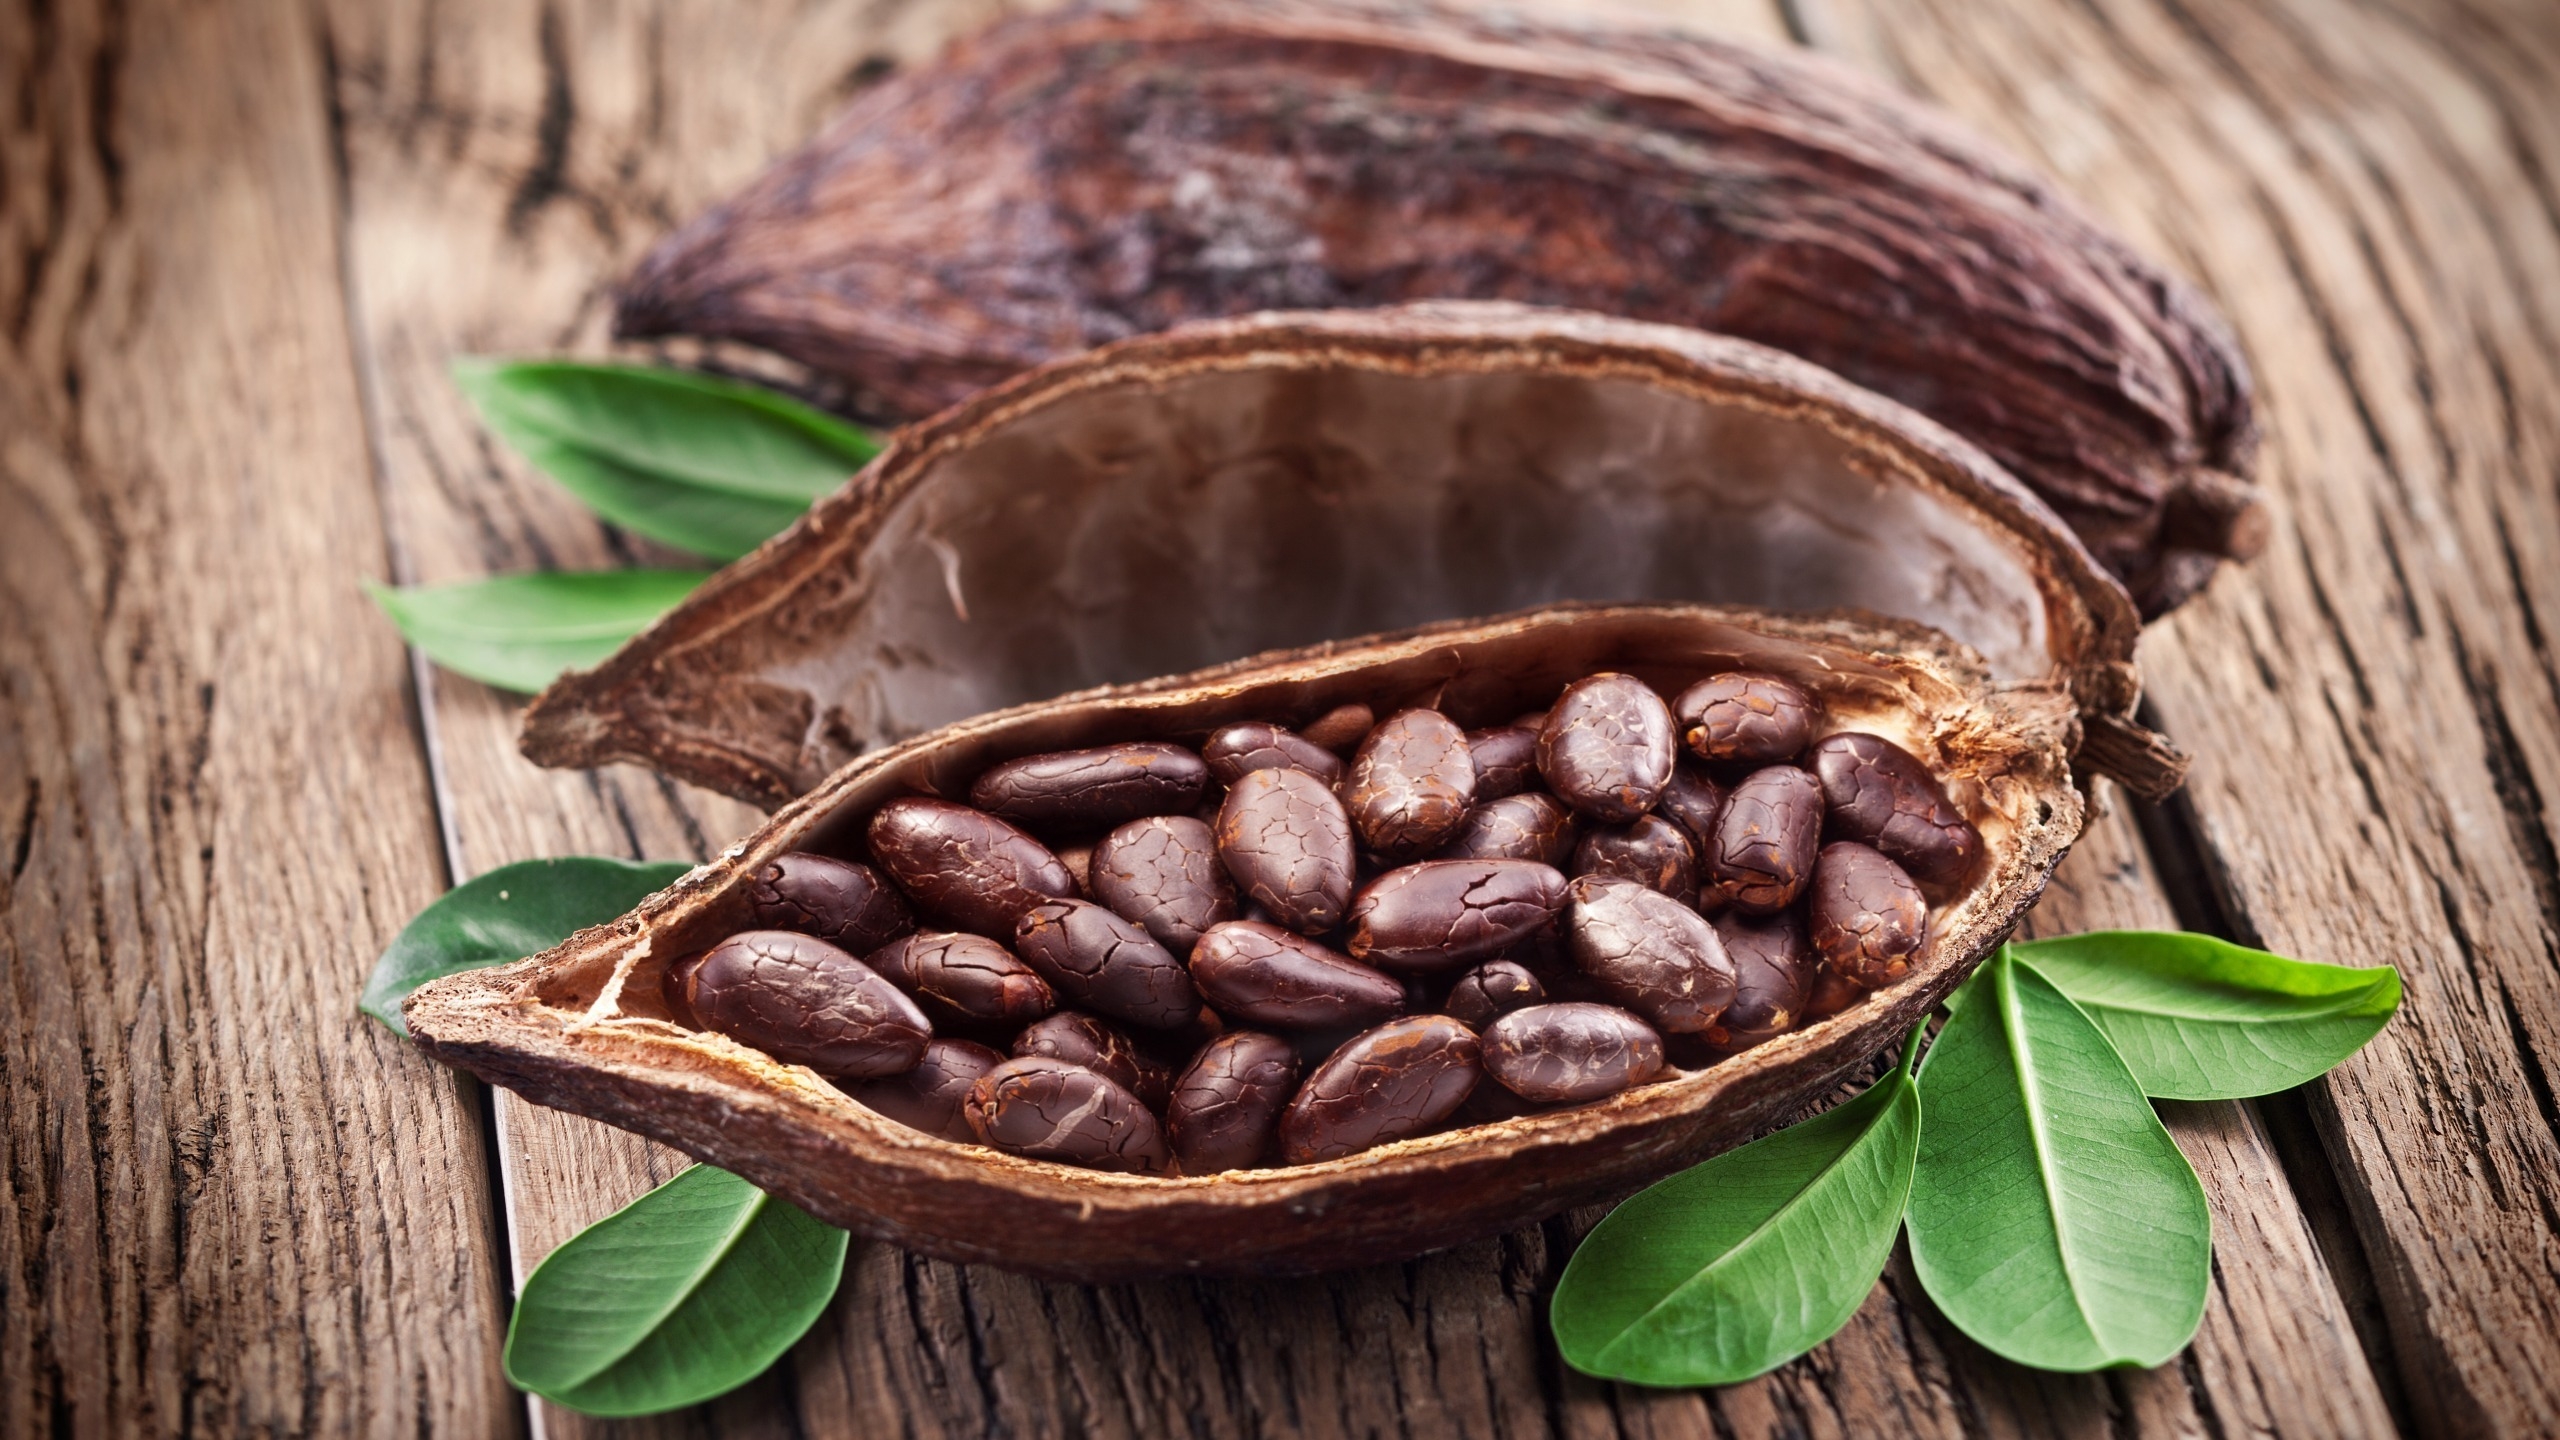 Cocoa Beans for 2560x1440 HDTV resolution